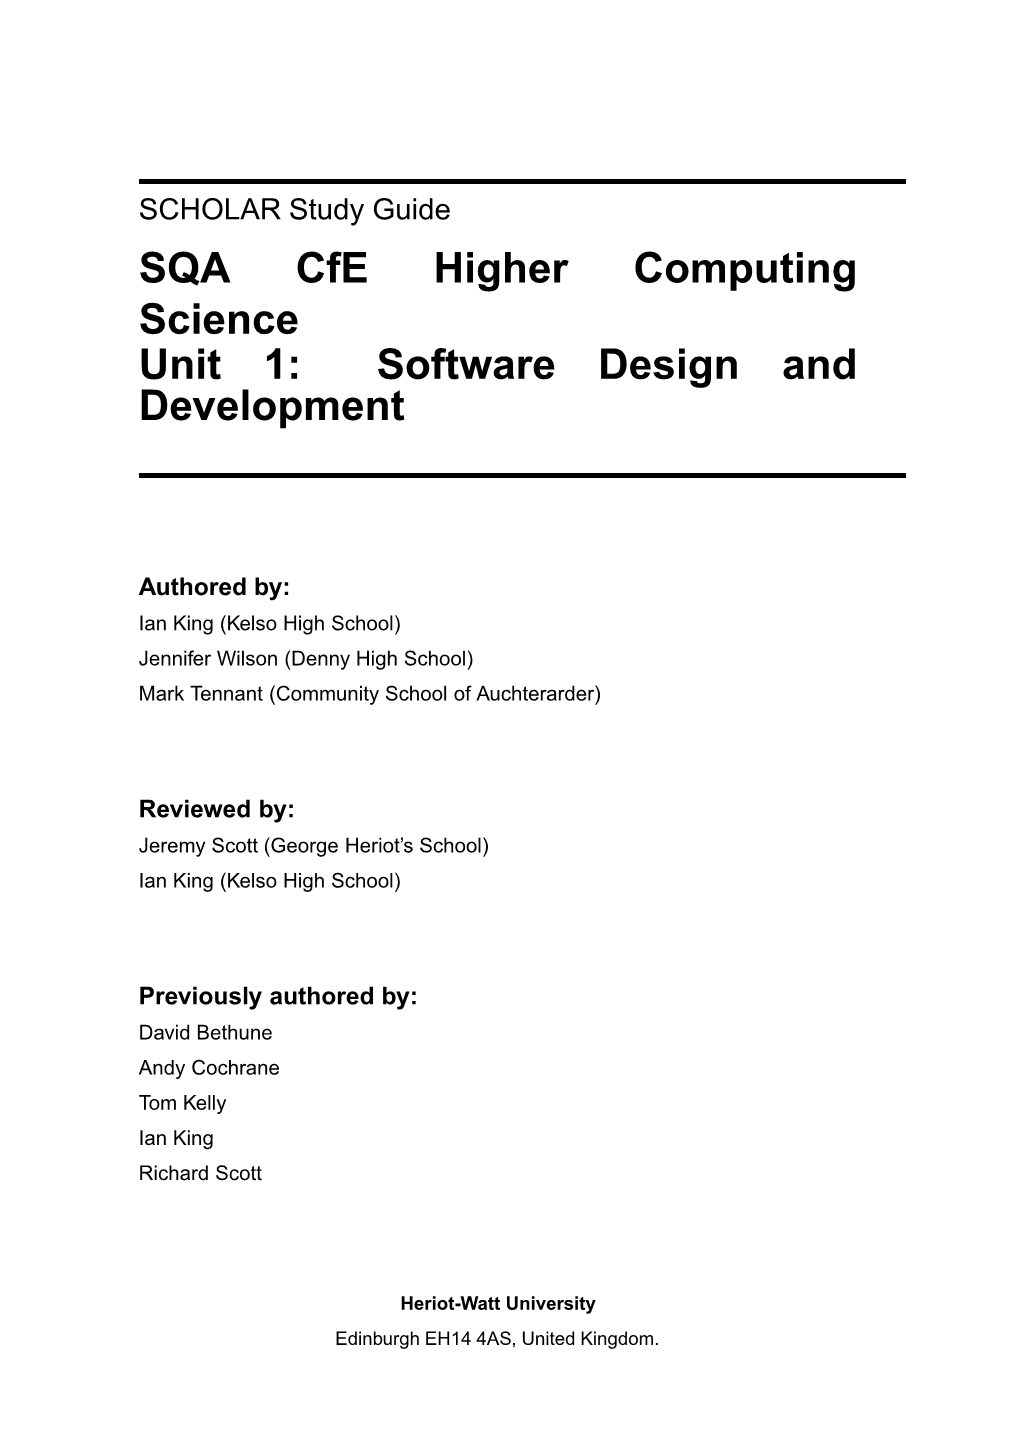 SQA Cfe Higher Computing Science Unit 1: Software Design and Development